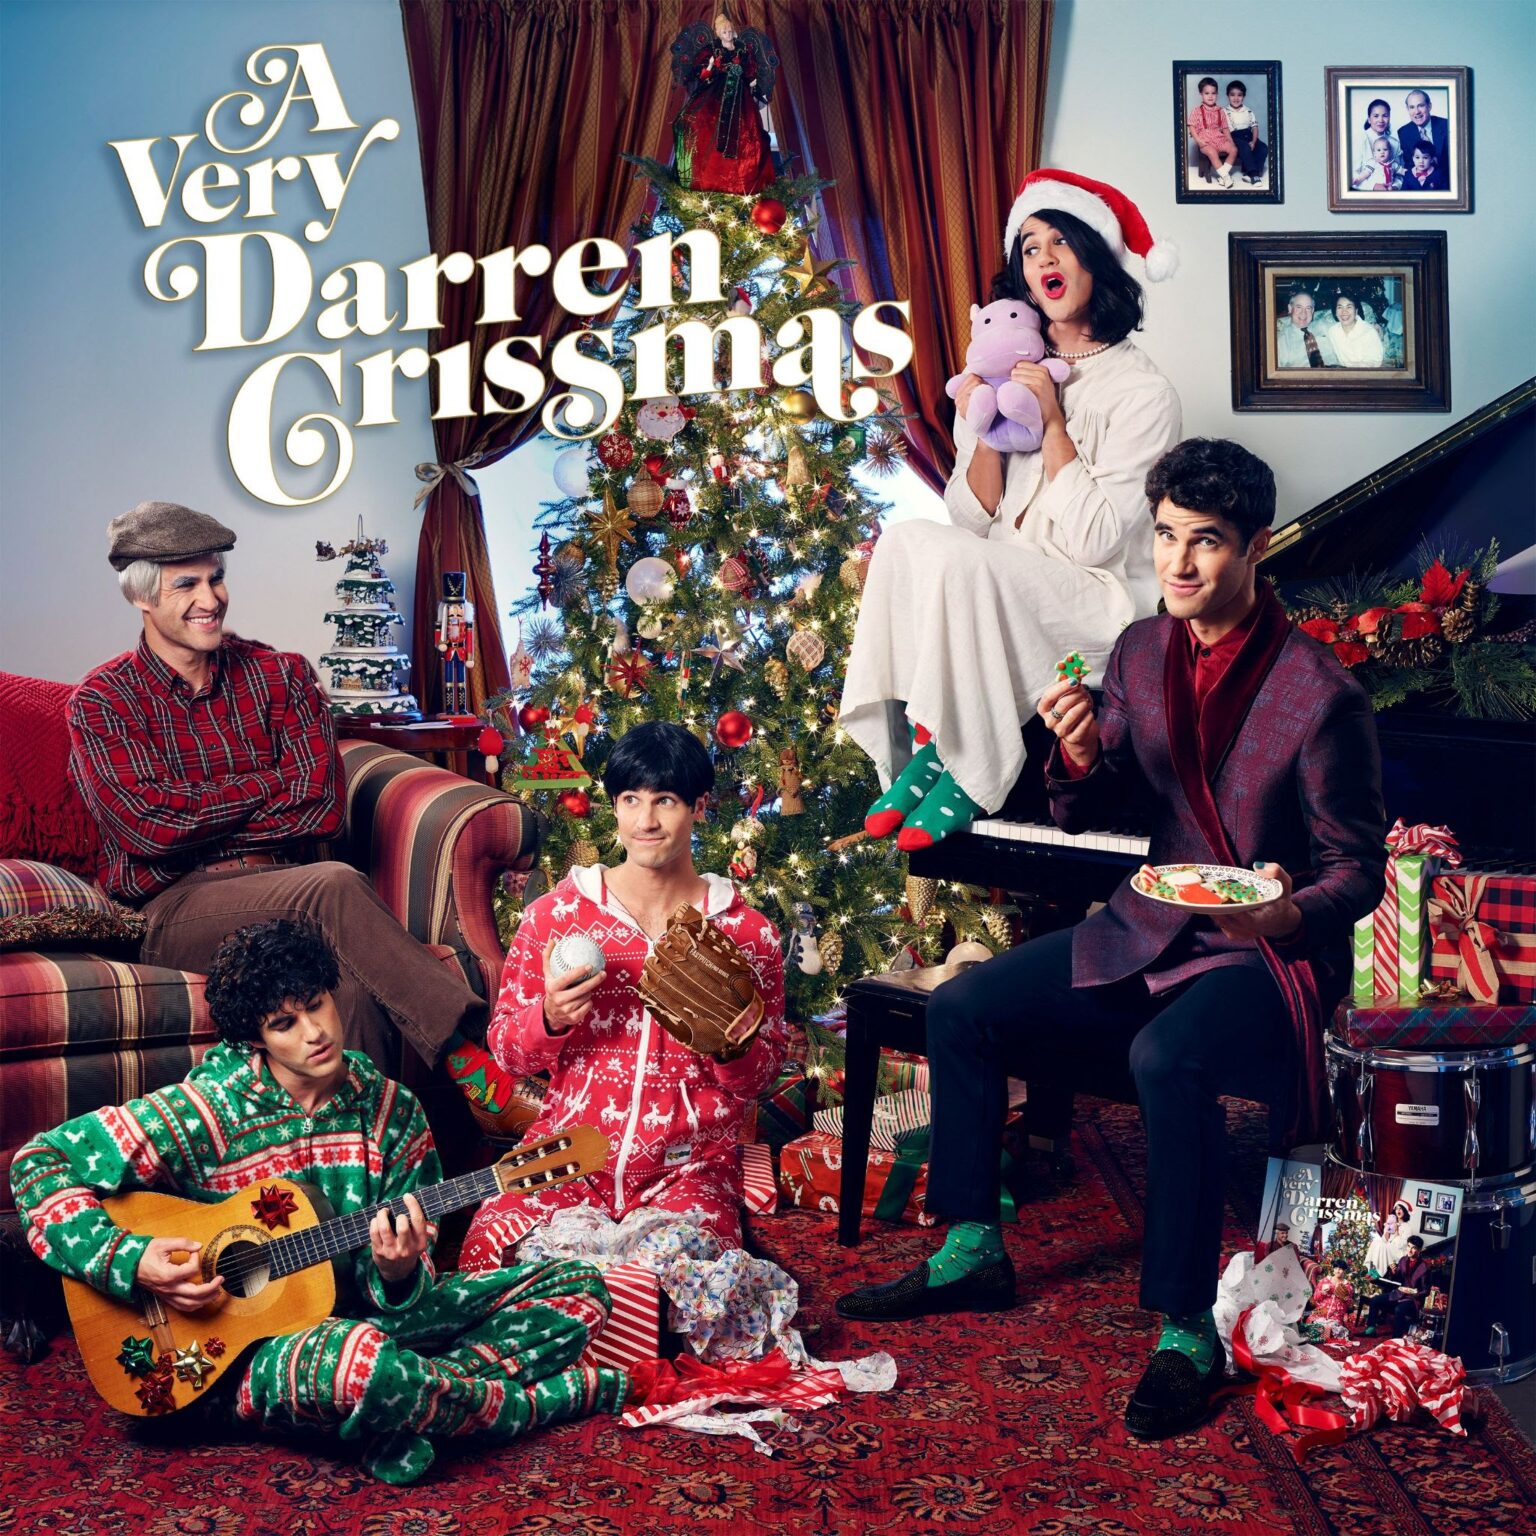 HOLIDAY SEASON ARRIVES EARLY WITH SINGERSONGWRITER DARREN CRISS’ A